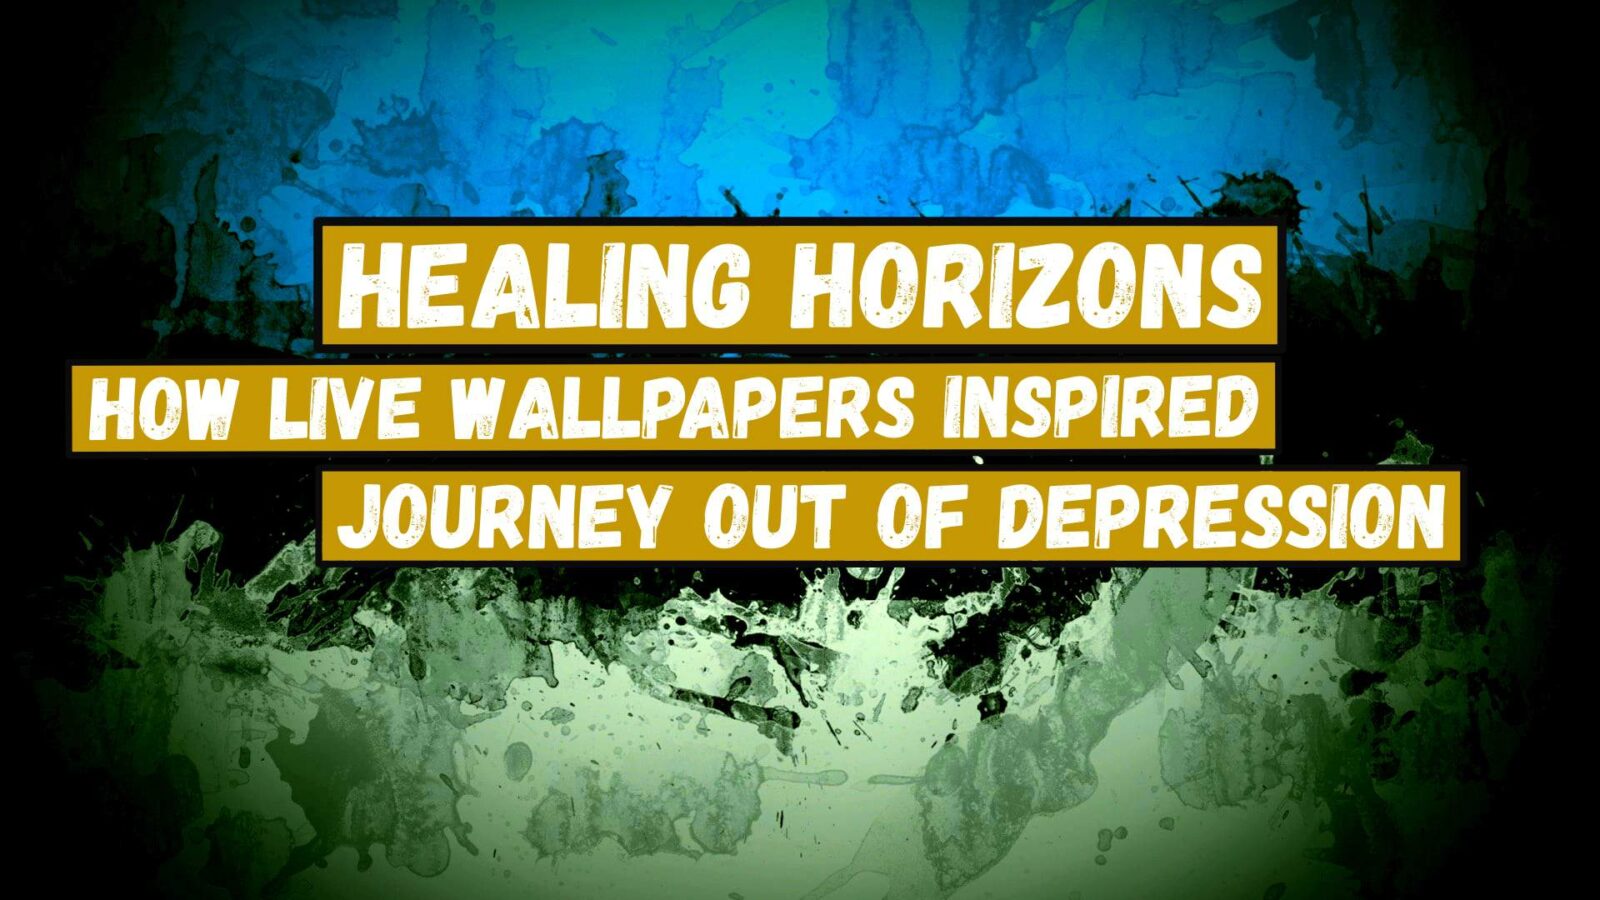 LiveWallpapers4Free.com | Healing Horizons: How Live Wallpapers Inspired Alex's Journey Out of Depression